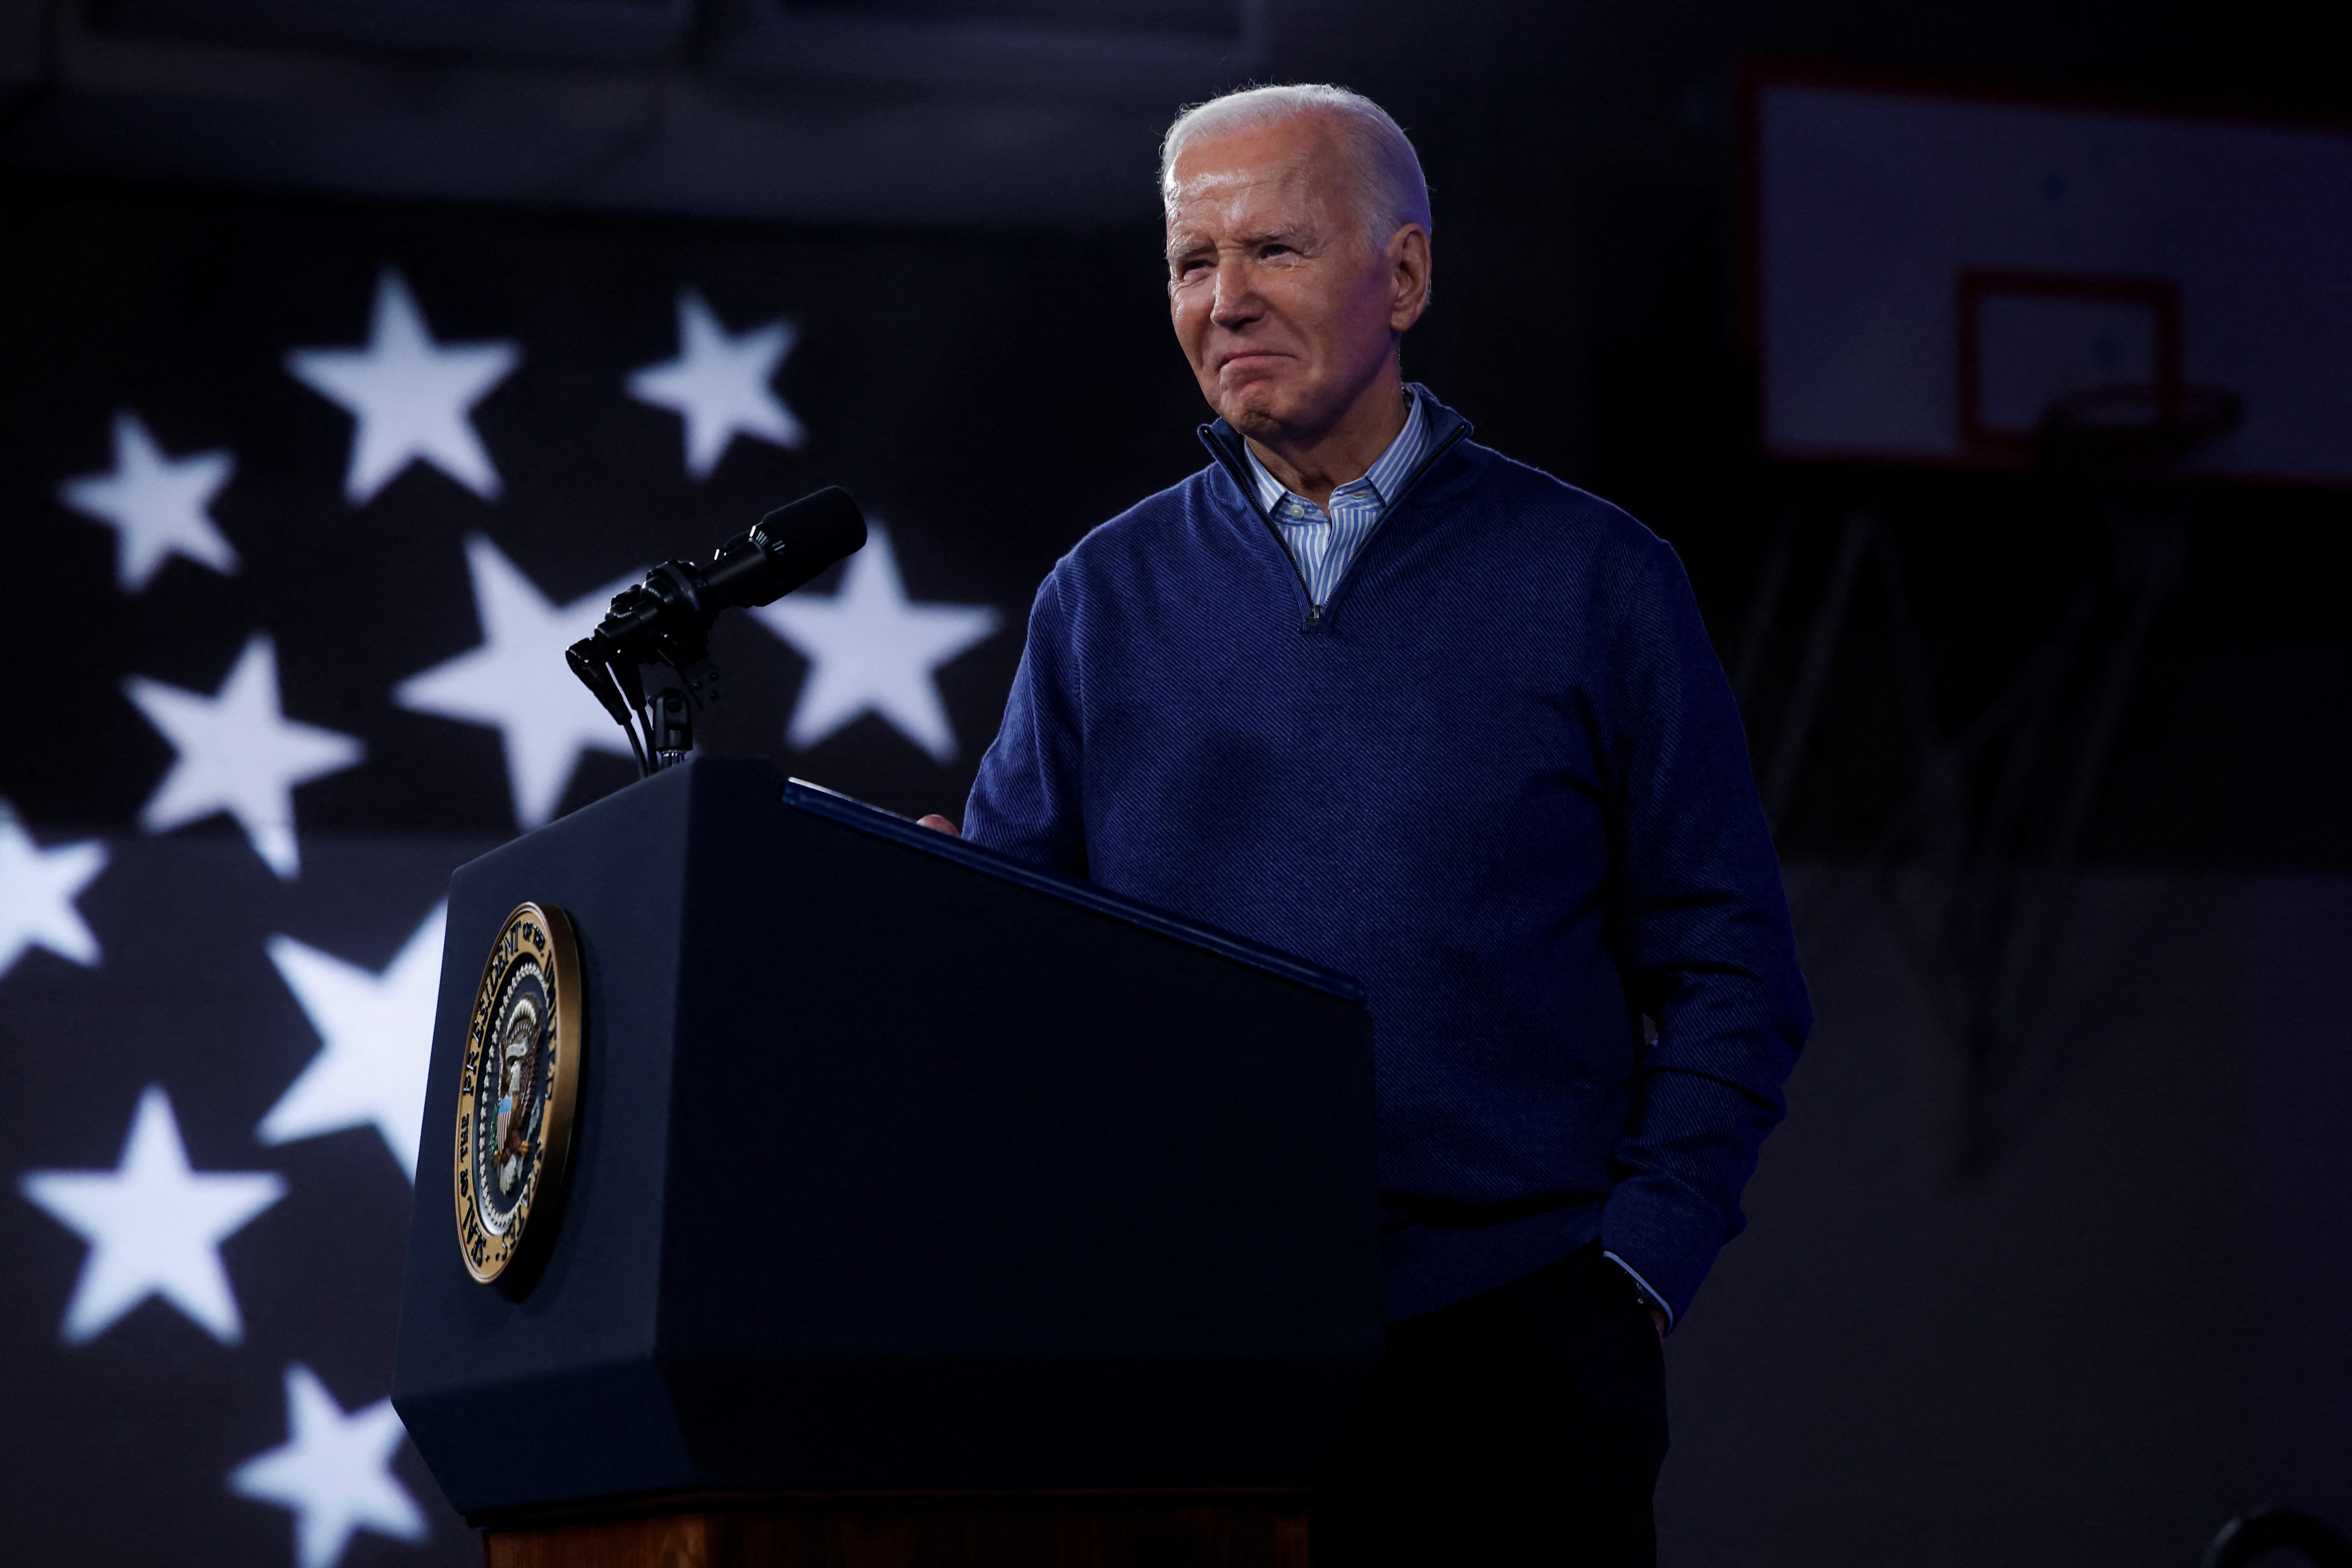 President Joe Biden attends a campaign event in Wallingford, Pennsylvania, on March 8.